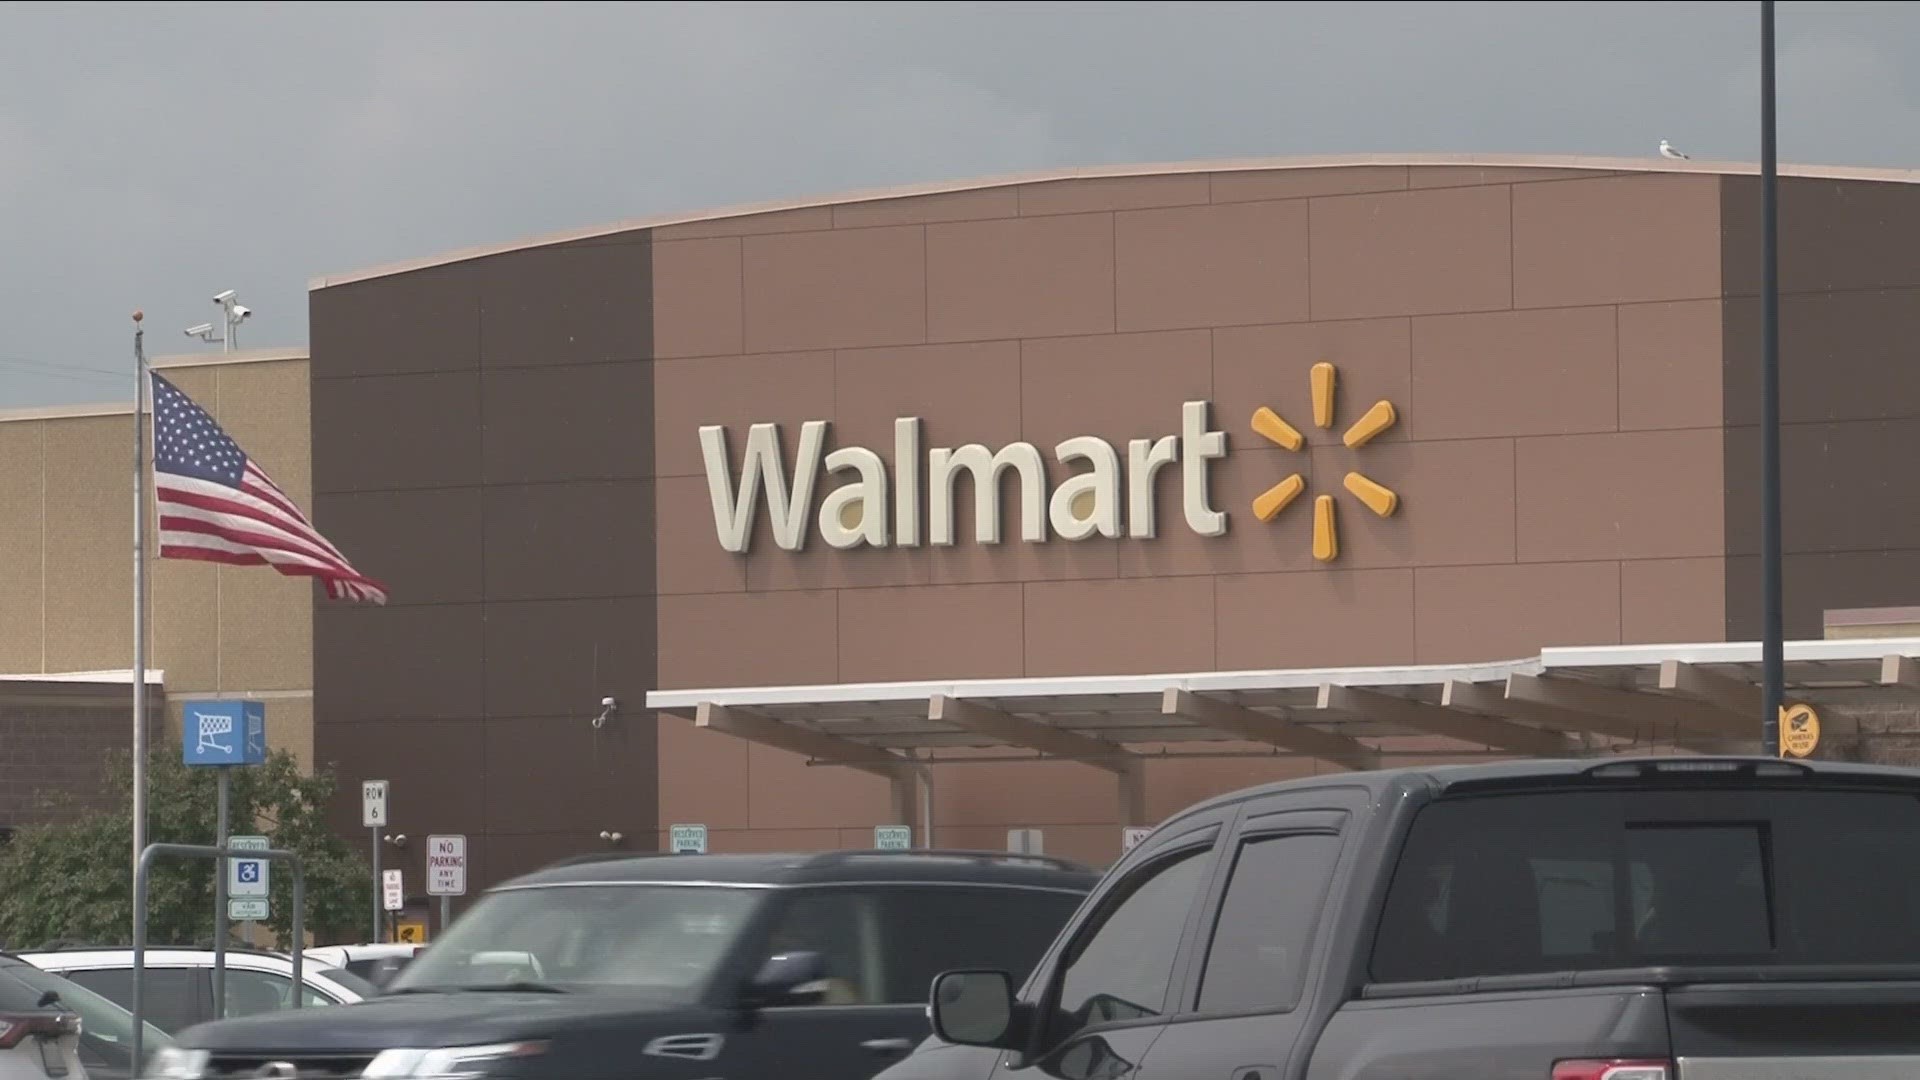 Last Friday, a card skimming device was found at the Walmart in Niagara Falls around 8 p.m.